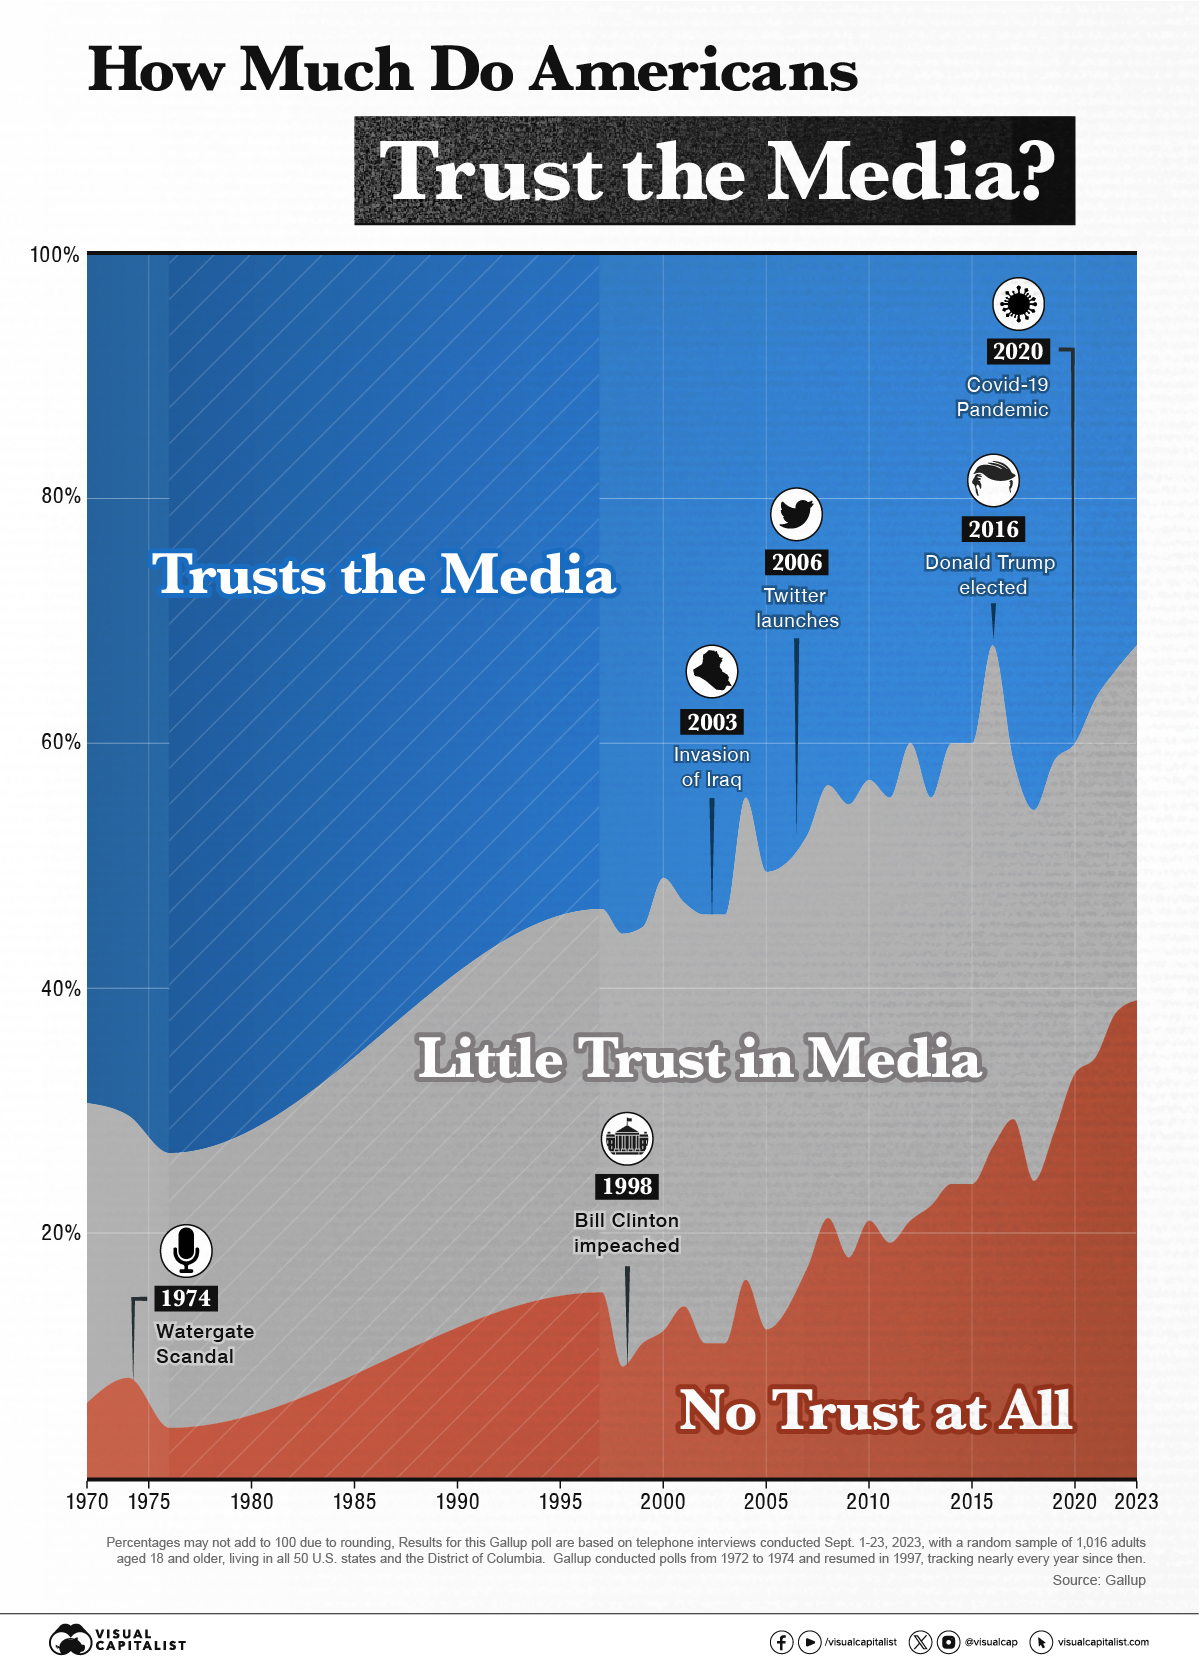 How much do Americans trust the media?